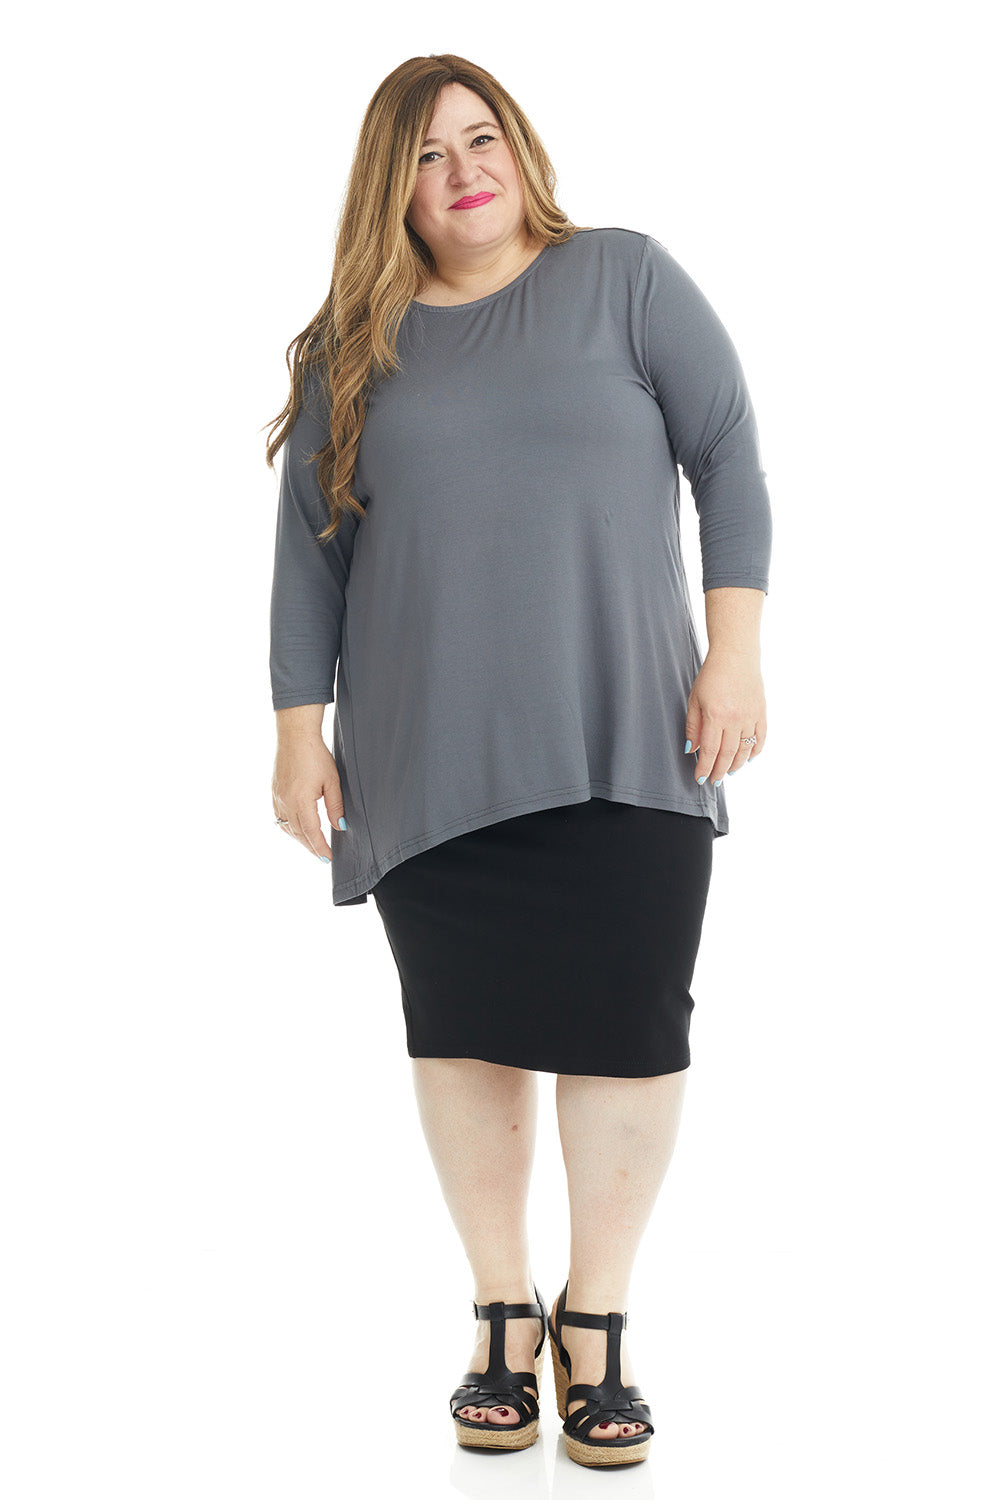 charcoal gray high-low loose tunic plus size top for women good for maternity